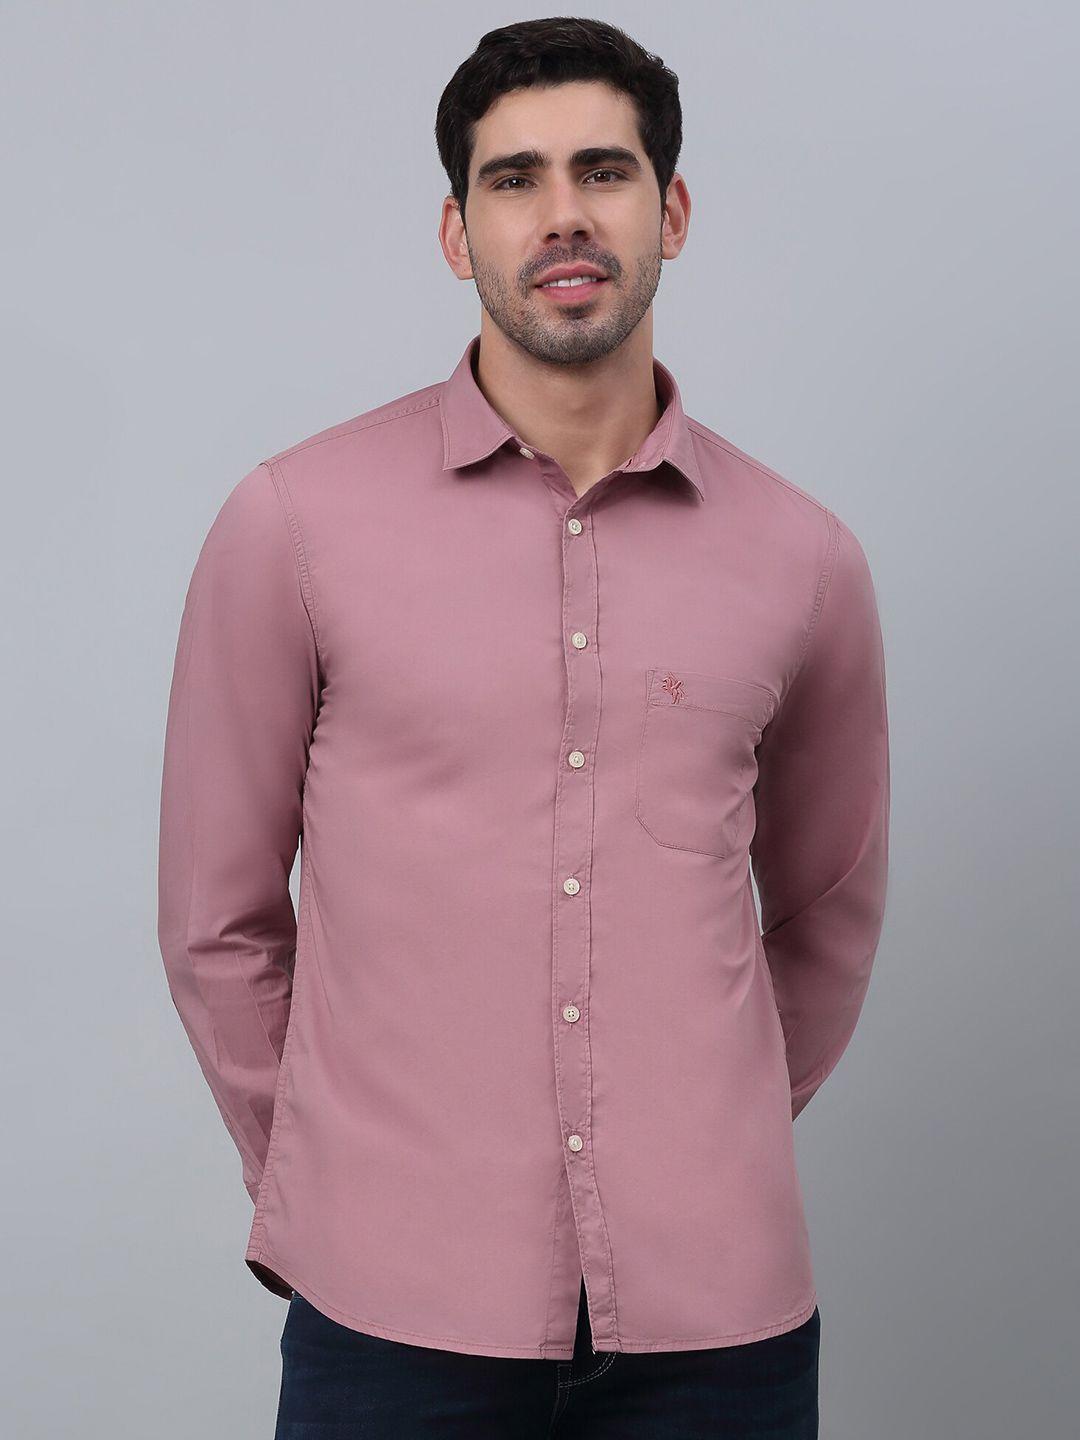 cantabil-comfort-spread-collar-long-sleeves-cotton-casual-shirt